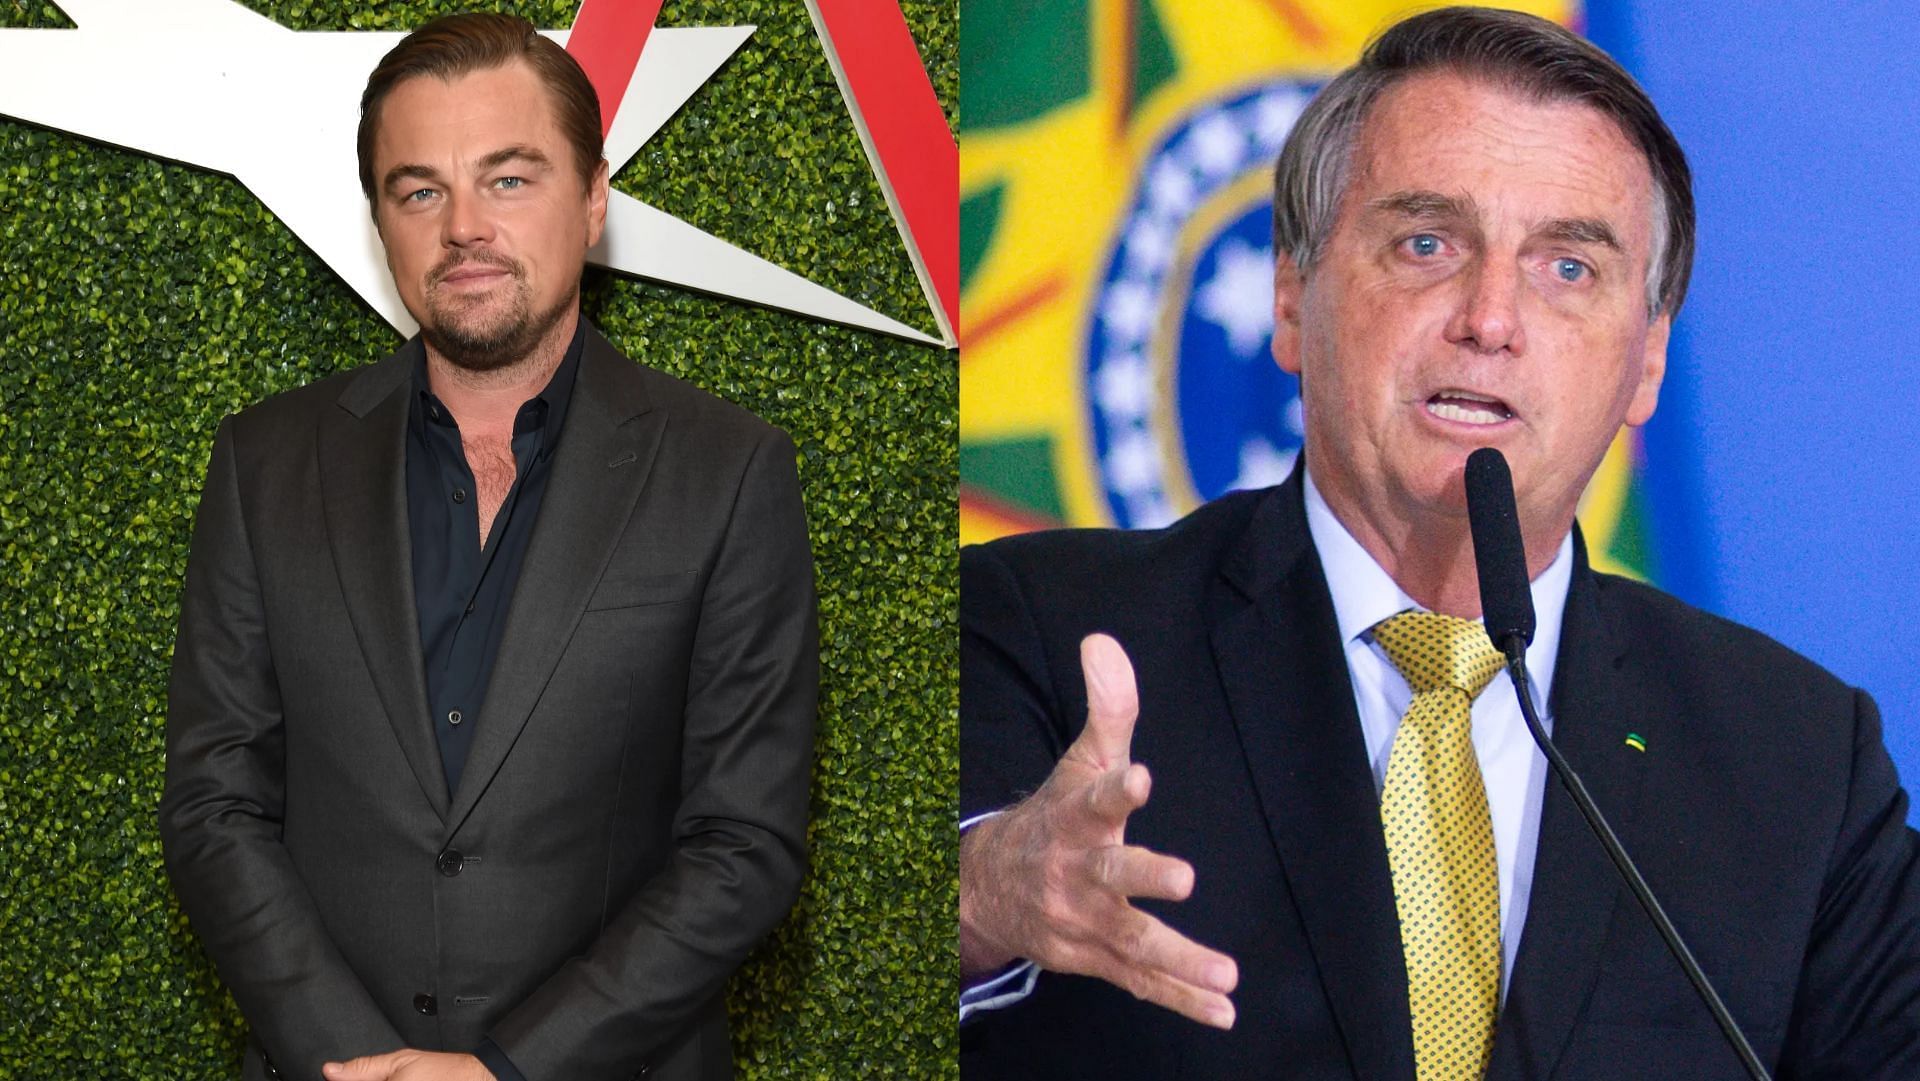 Leonardo DiCaprio has been called out before for his luxurious non-eco-friendly holiday trips. (Image via Barry King/Getty, Andressa Anholete/Getty)